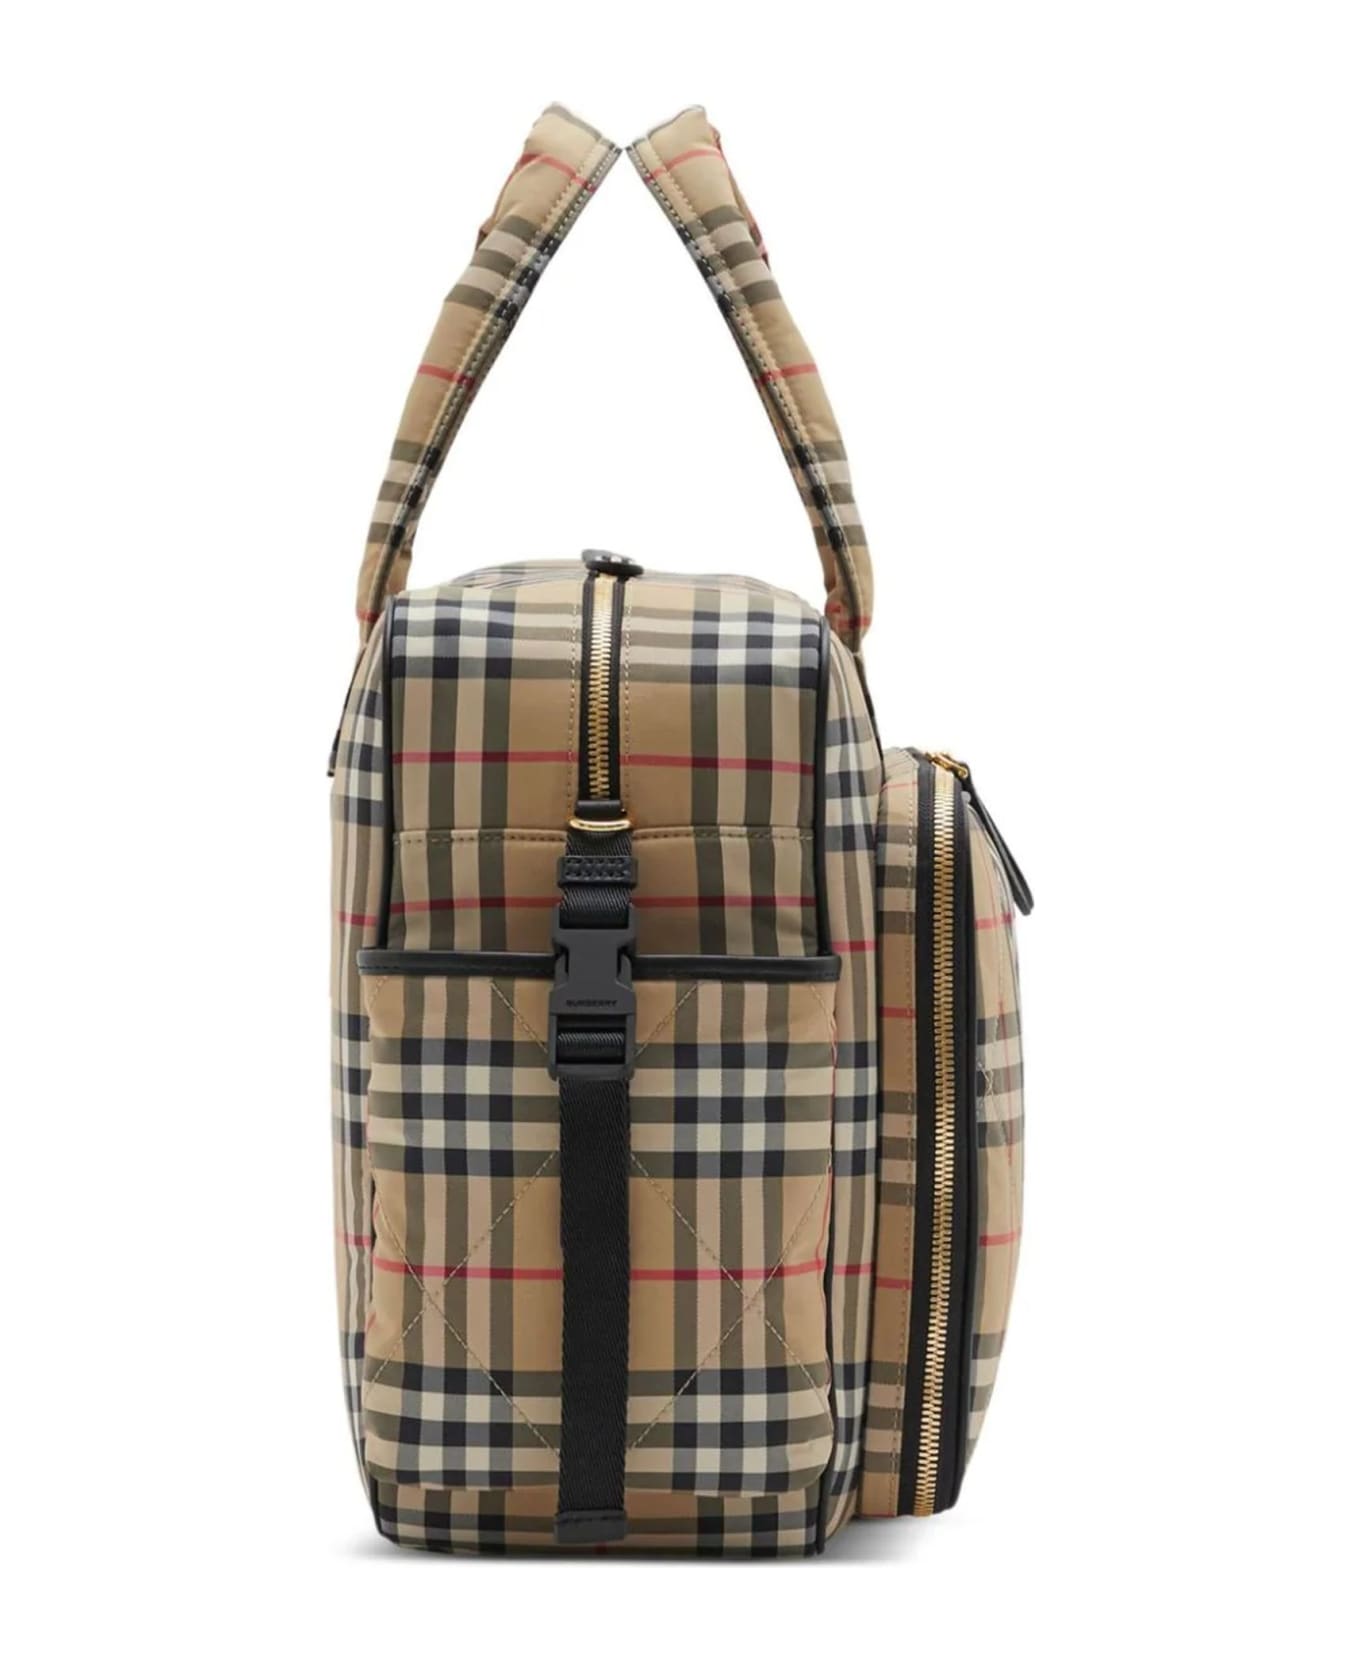 Burberry Check Polyamide Changing Bag - Archive beige chk